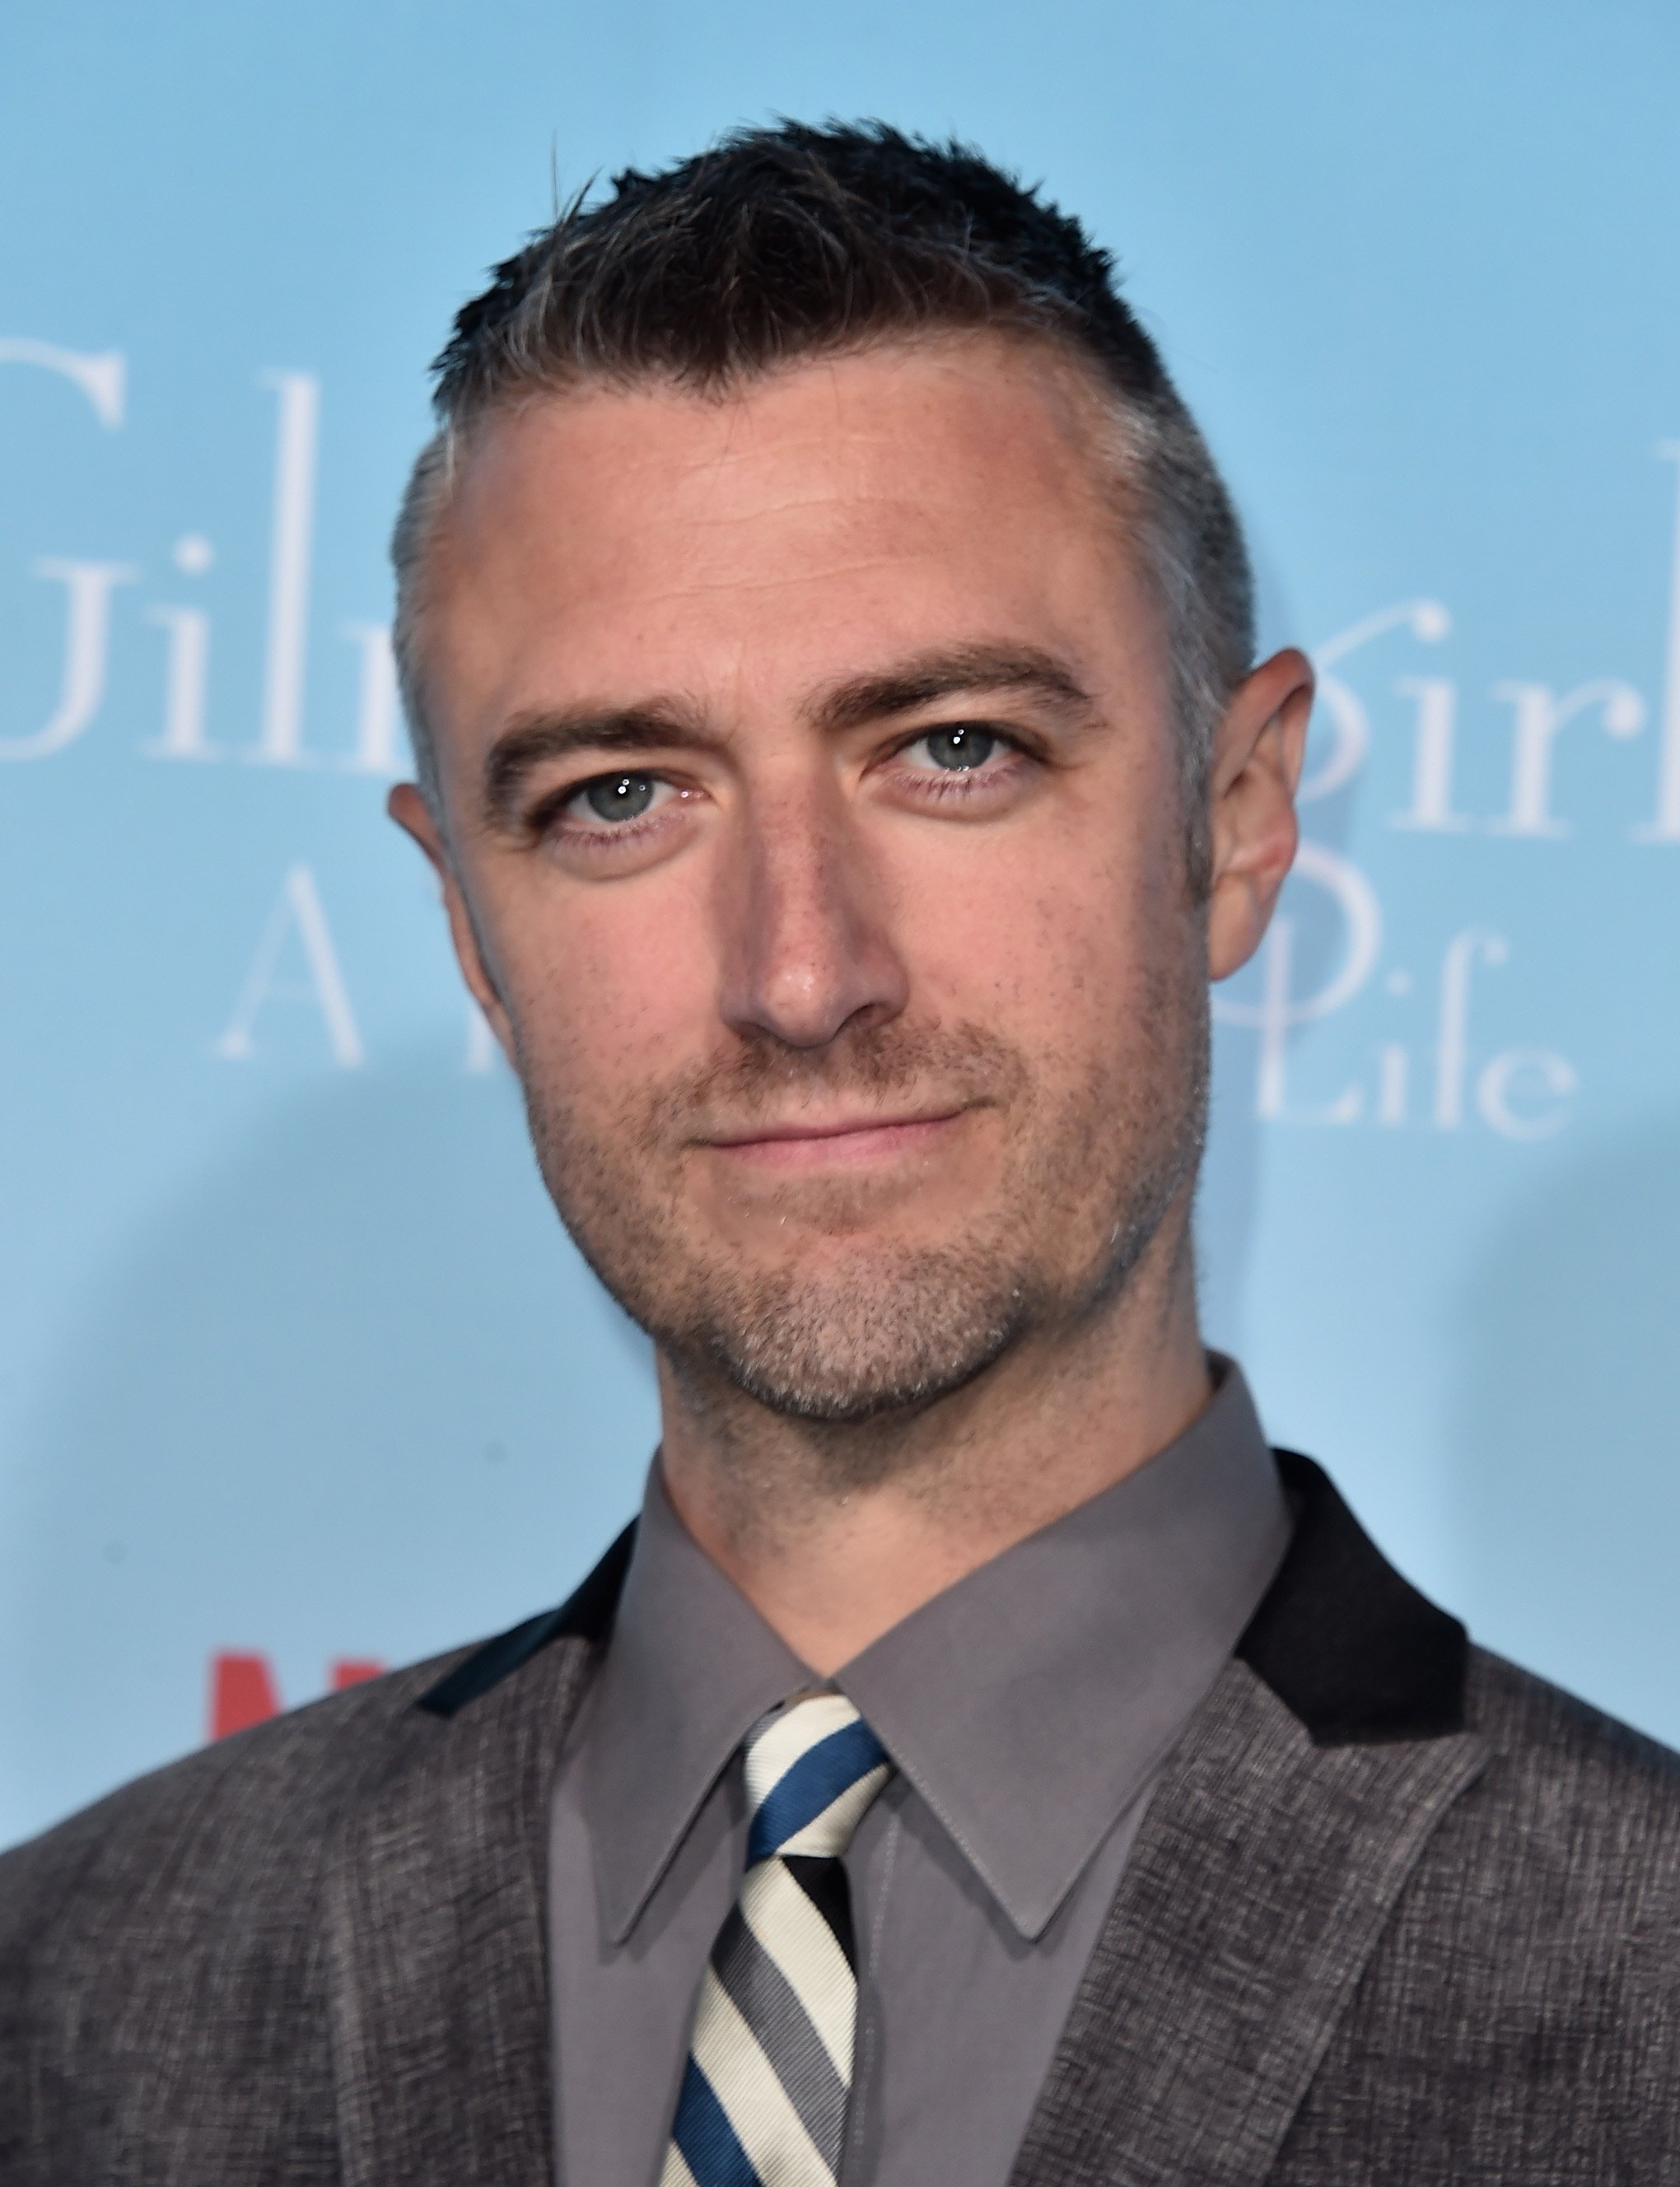 Sean Gunn attends the premiere of 'Gilmore Girls: A Year In The Life' at the Regency Bruin Theatre